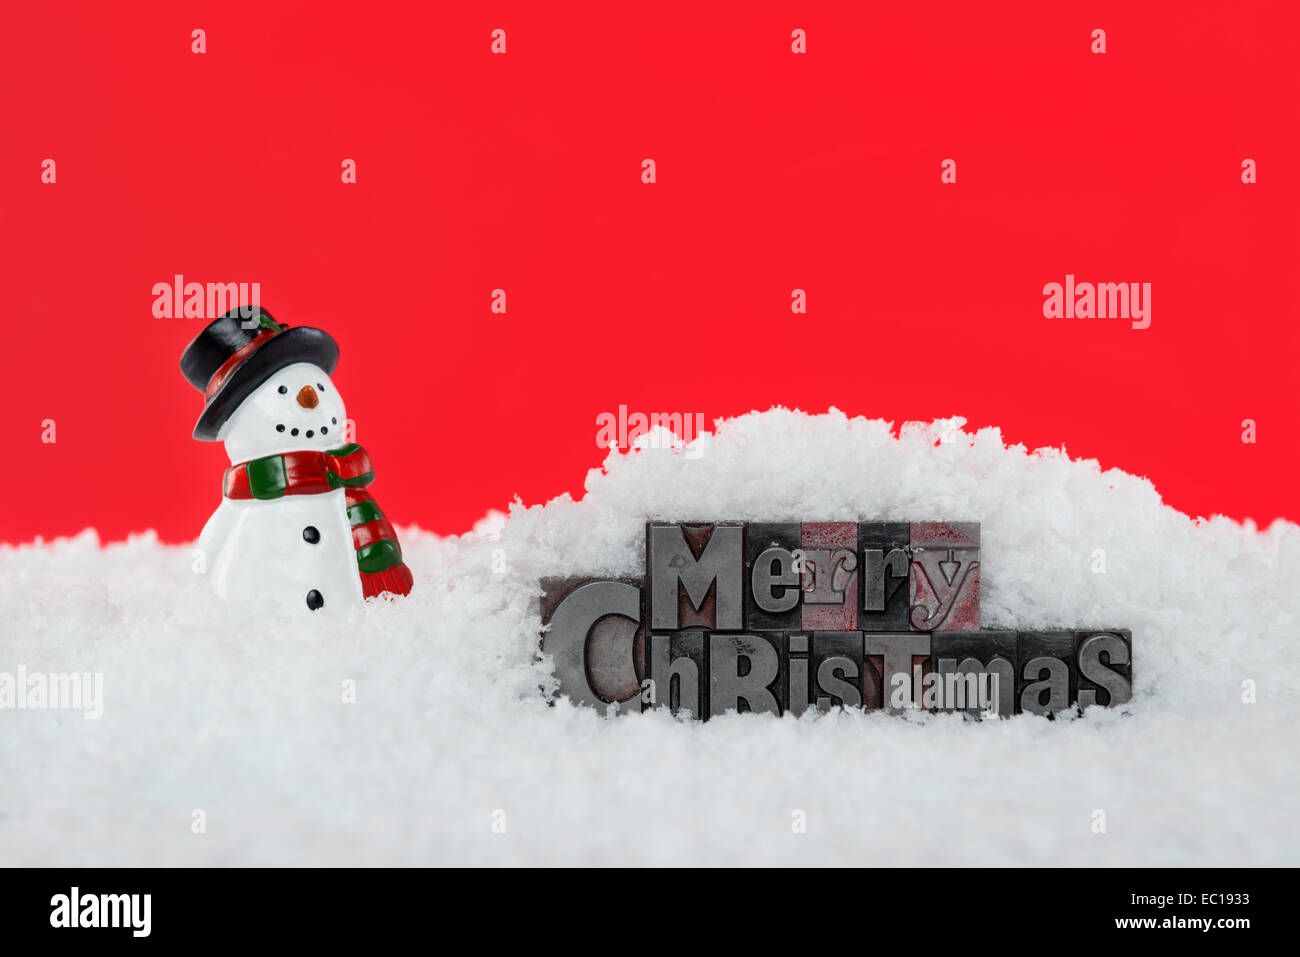 The words Merry Christmas in old letterpress surrounded by snow and a snowman, red background. Stock Photo